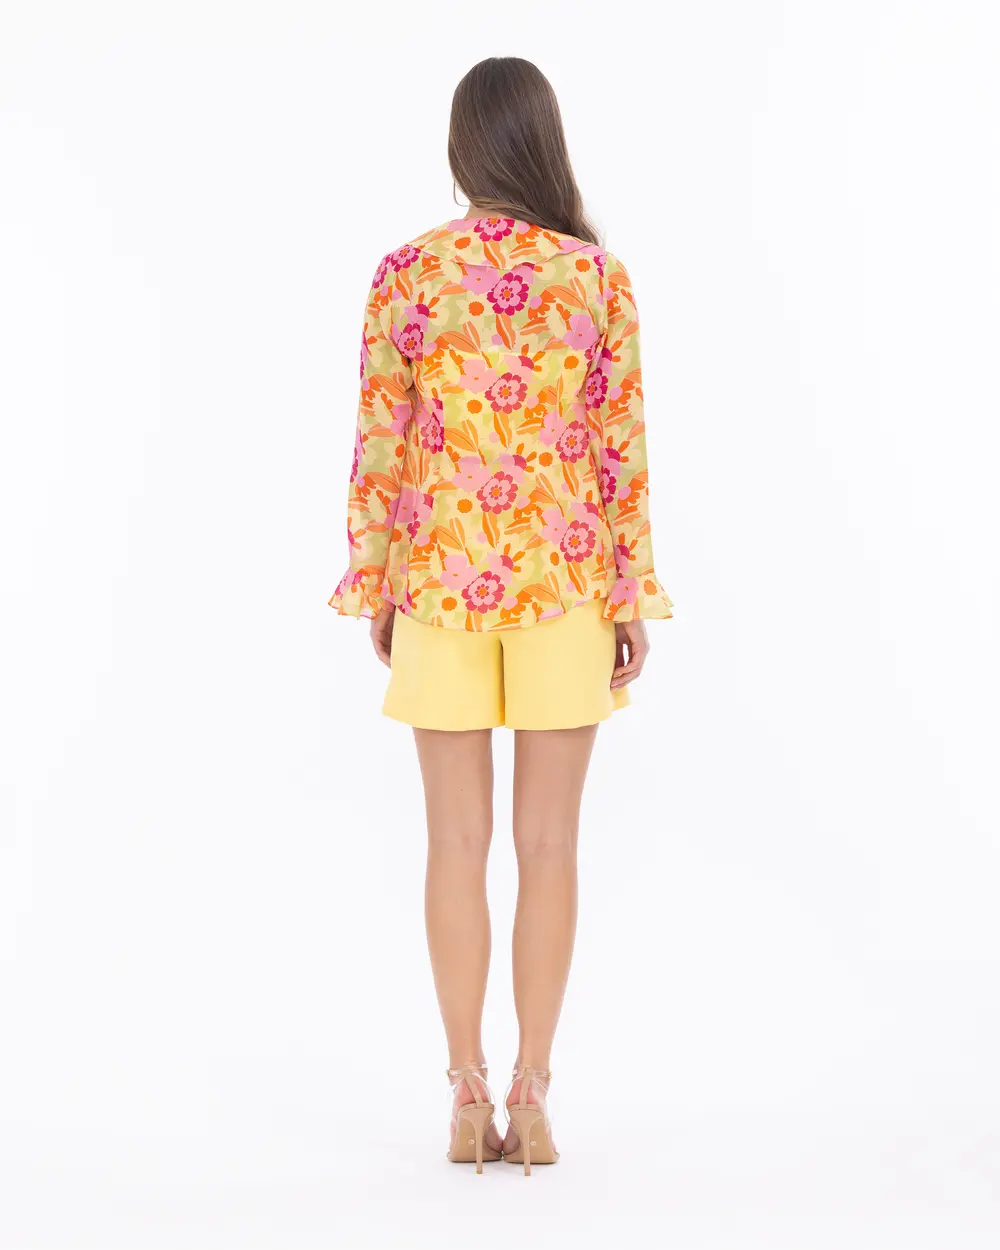 Ruffled Jacket With Floral Pattern Underwear Blouse